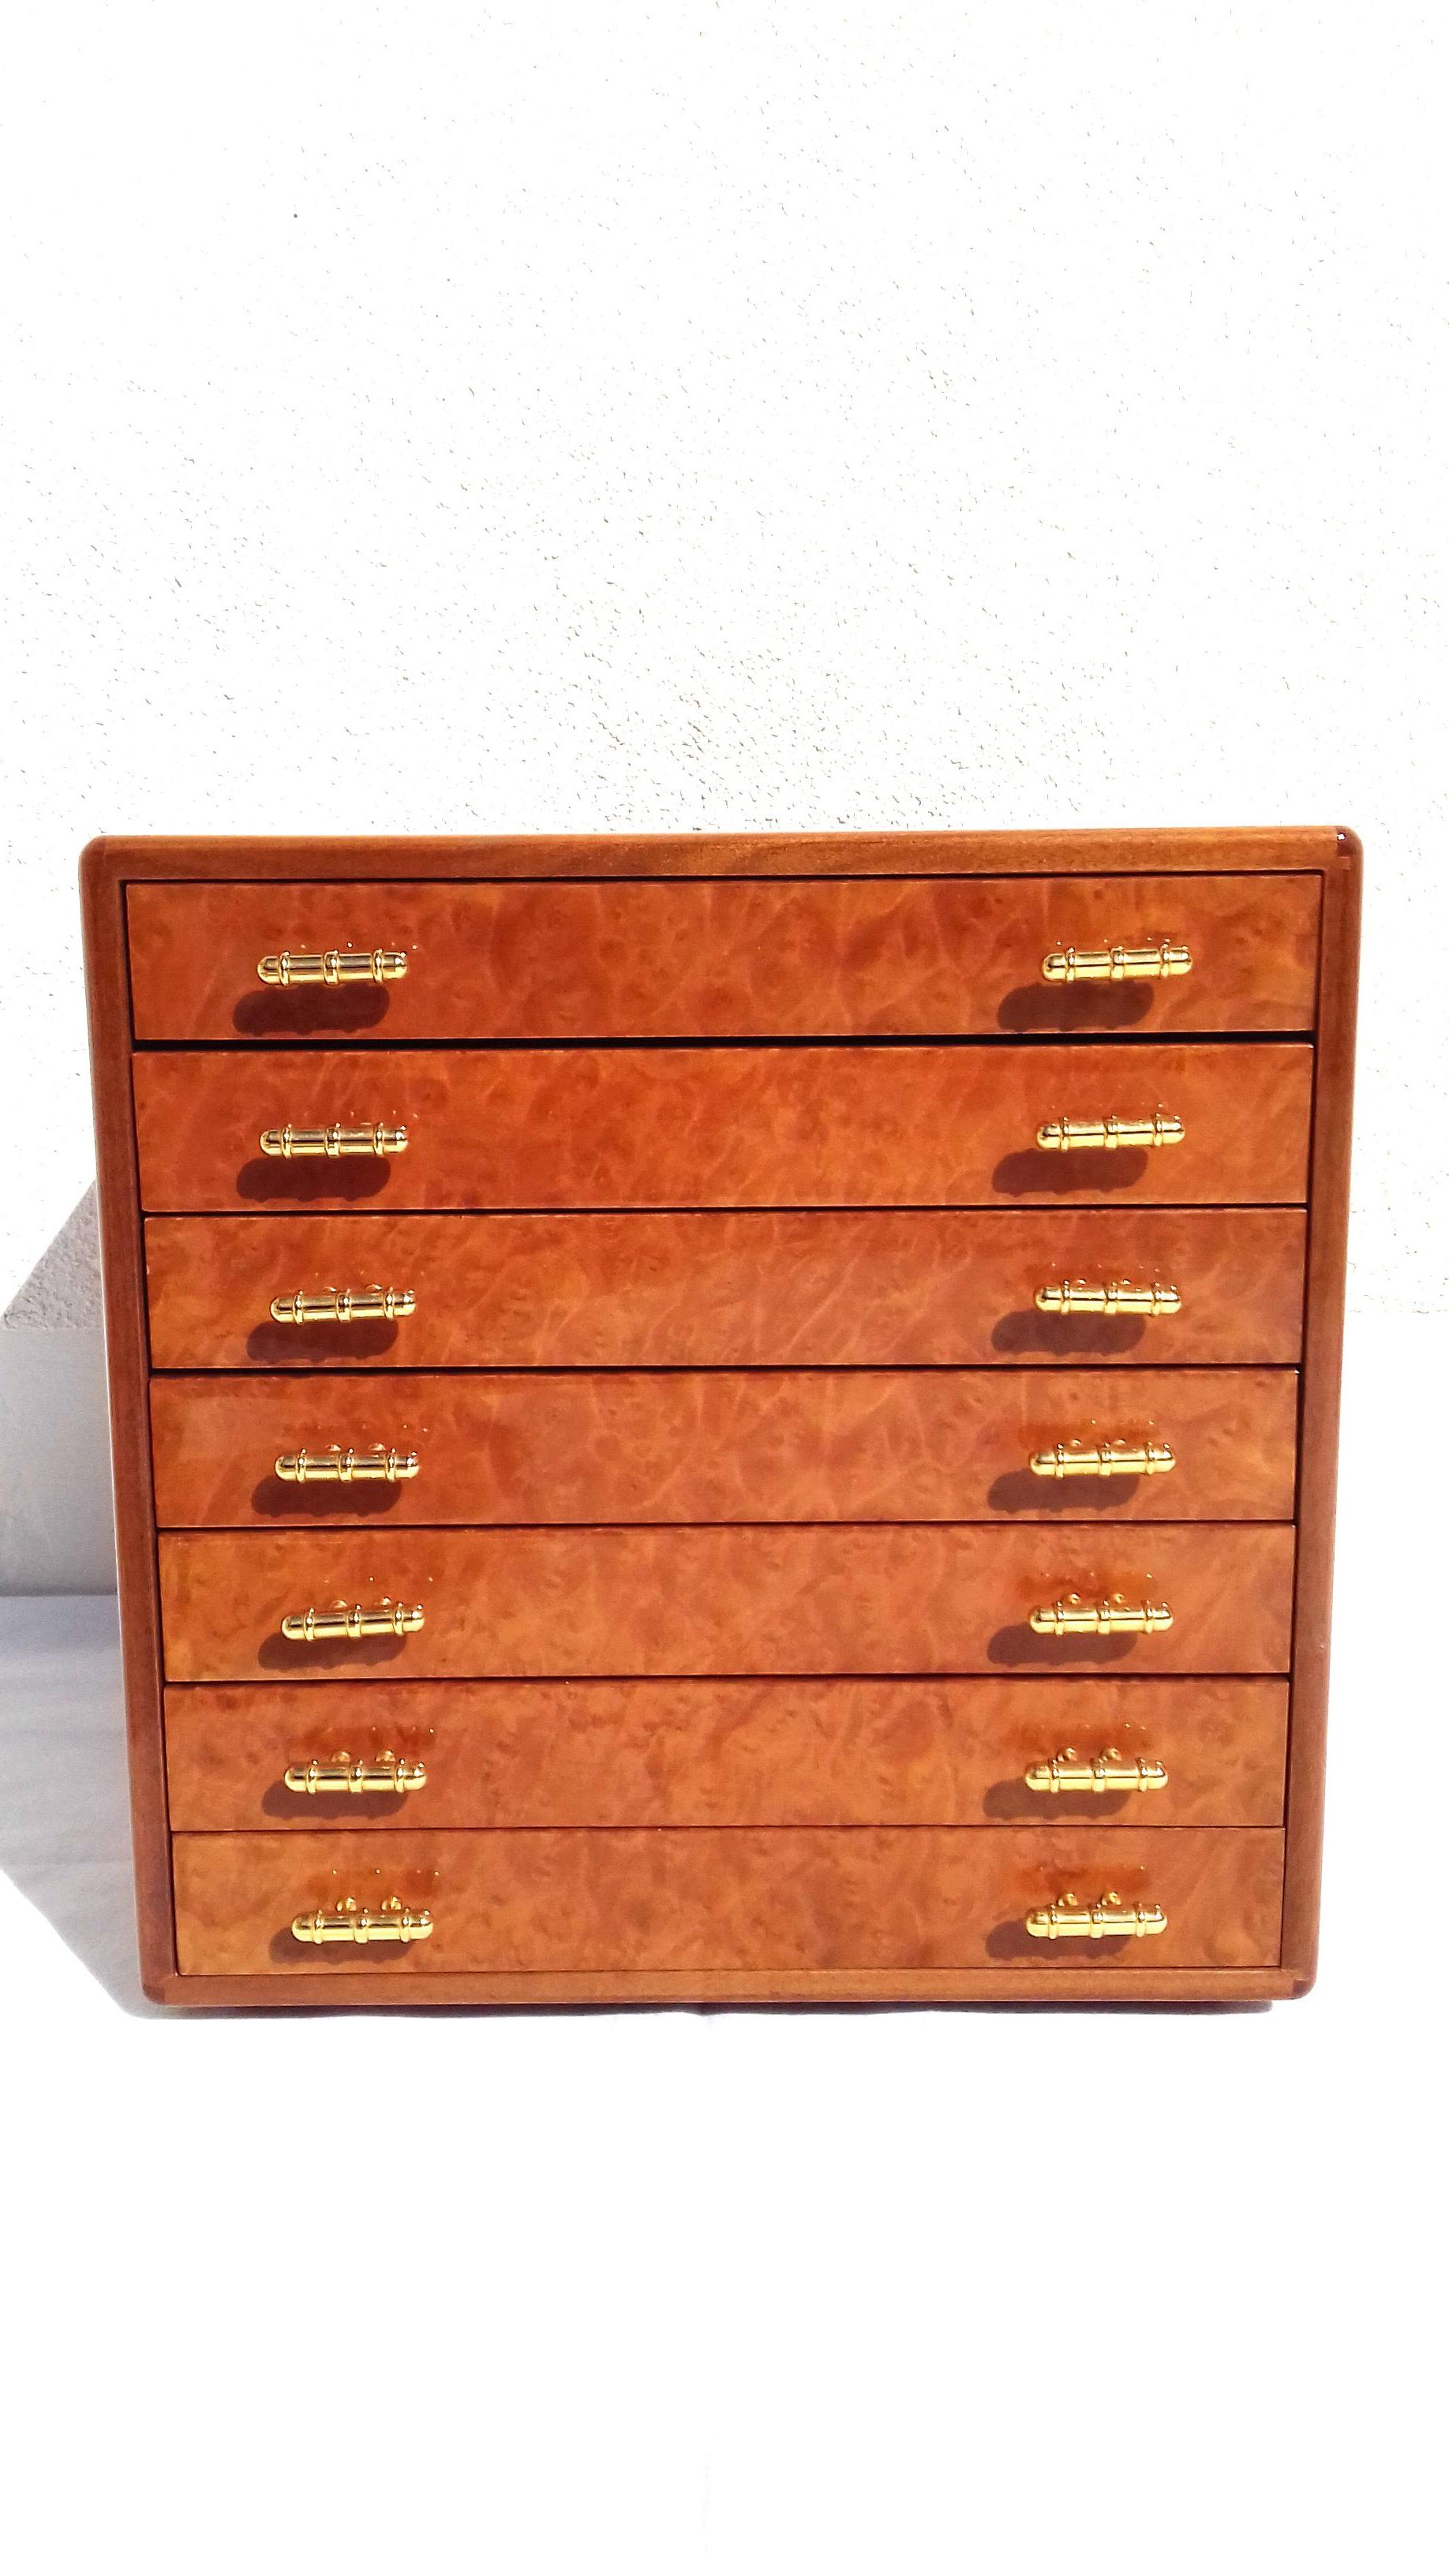 Exceptional Hermès Drawer to store scarves or Jewelry In Wood Inlaid RARE 11